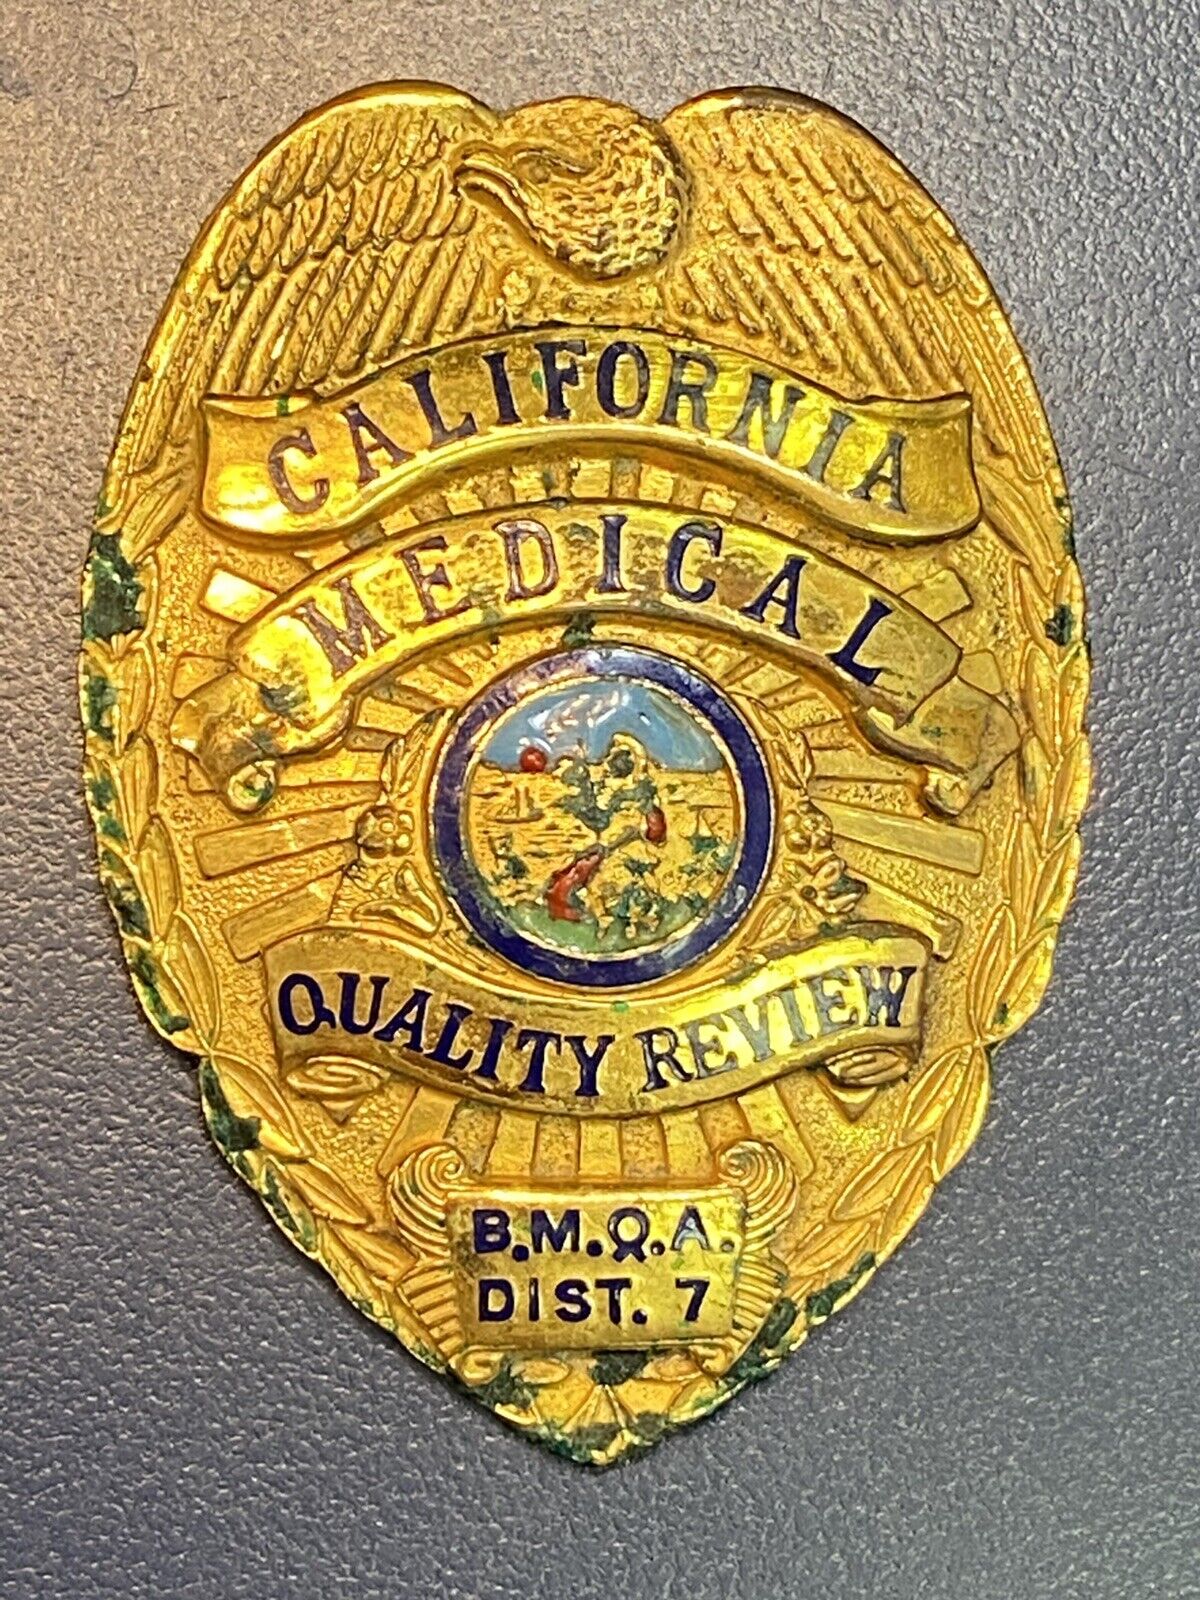 Great Looking Obsolete California Medical Quality Review Flat Badge